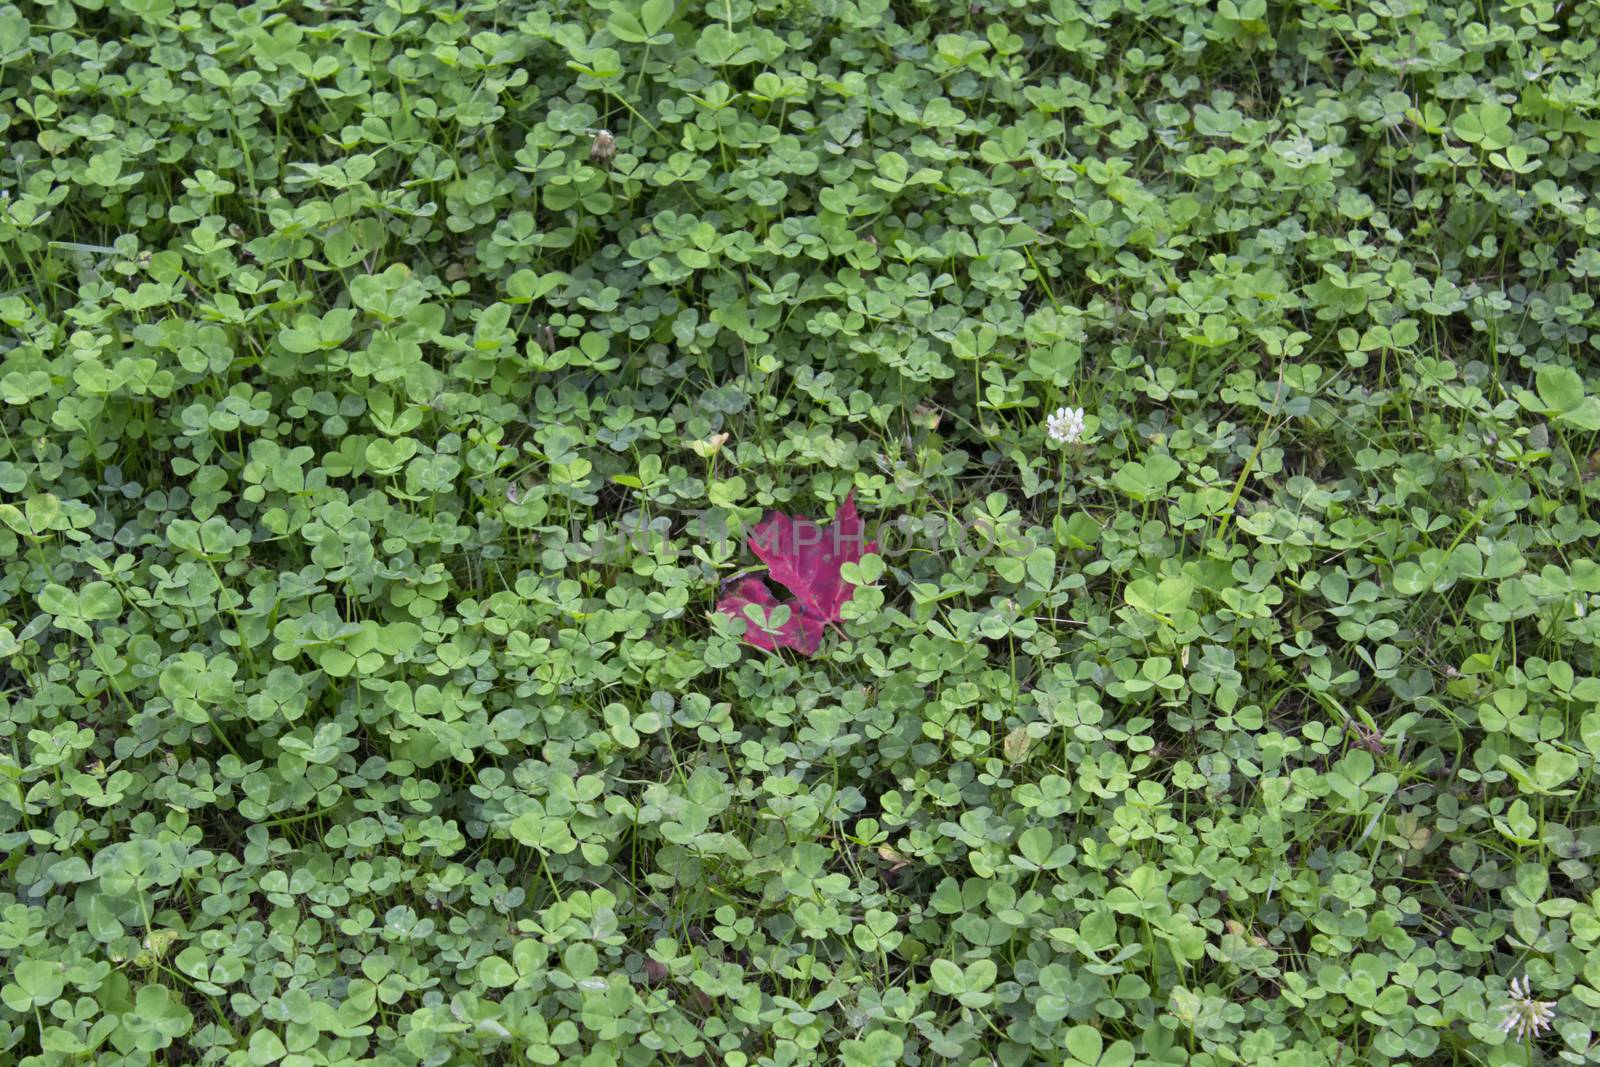 Field of clover with red maple leaf